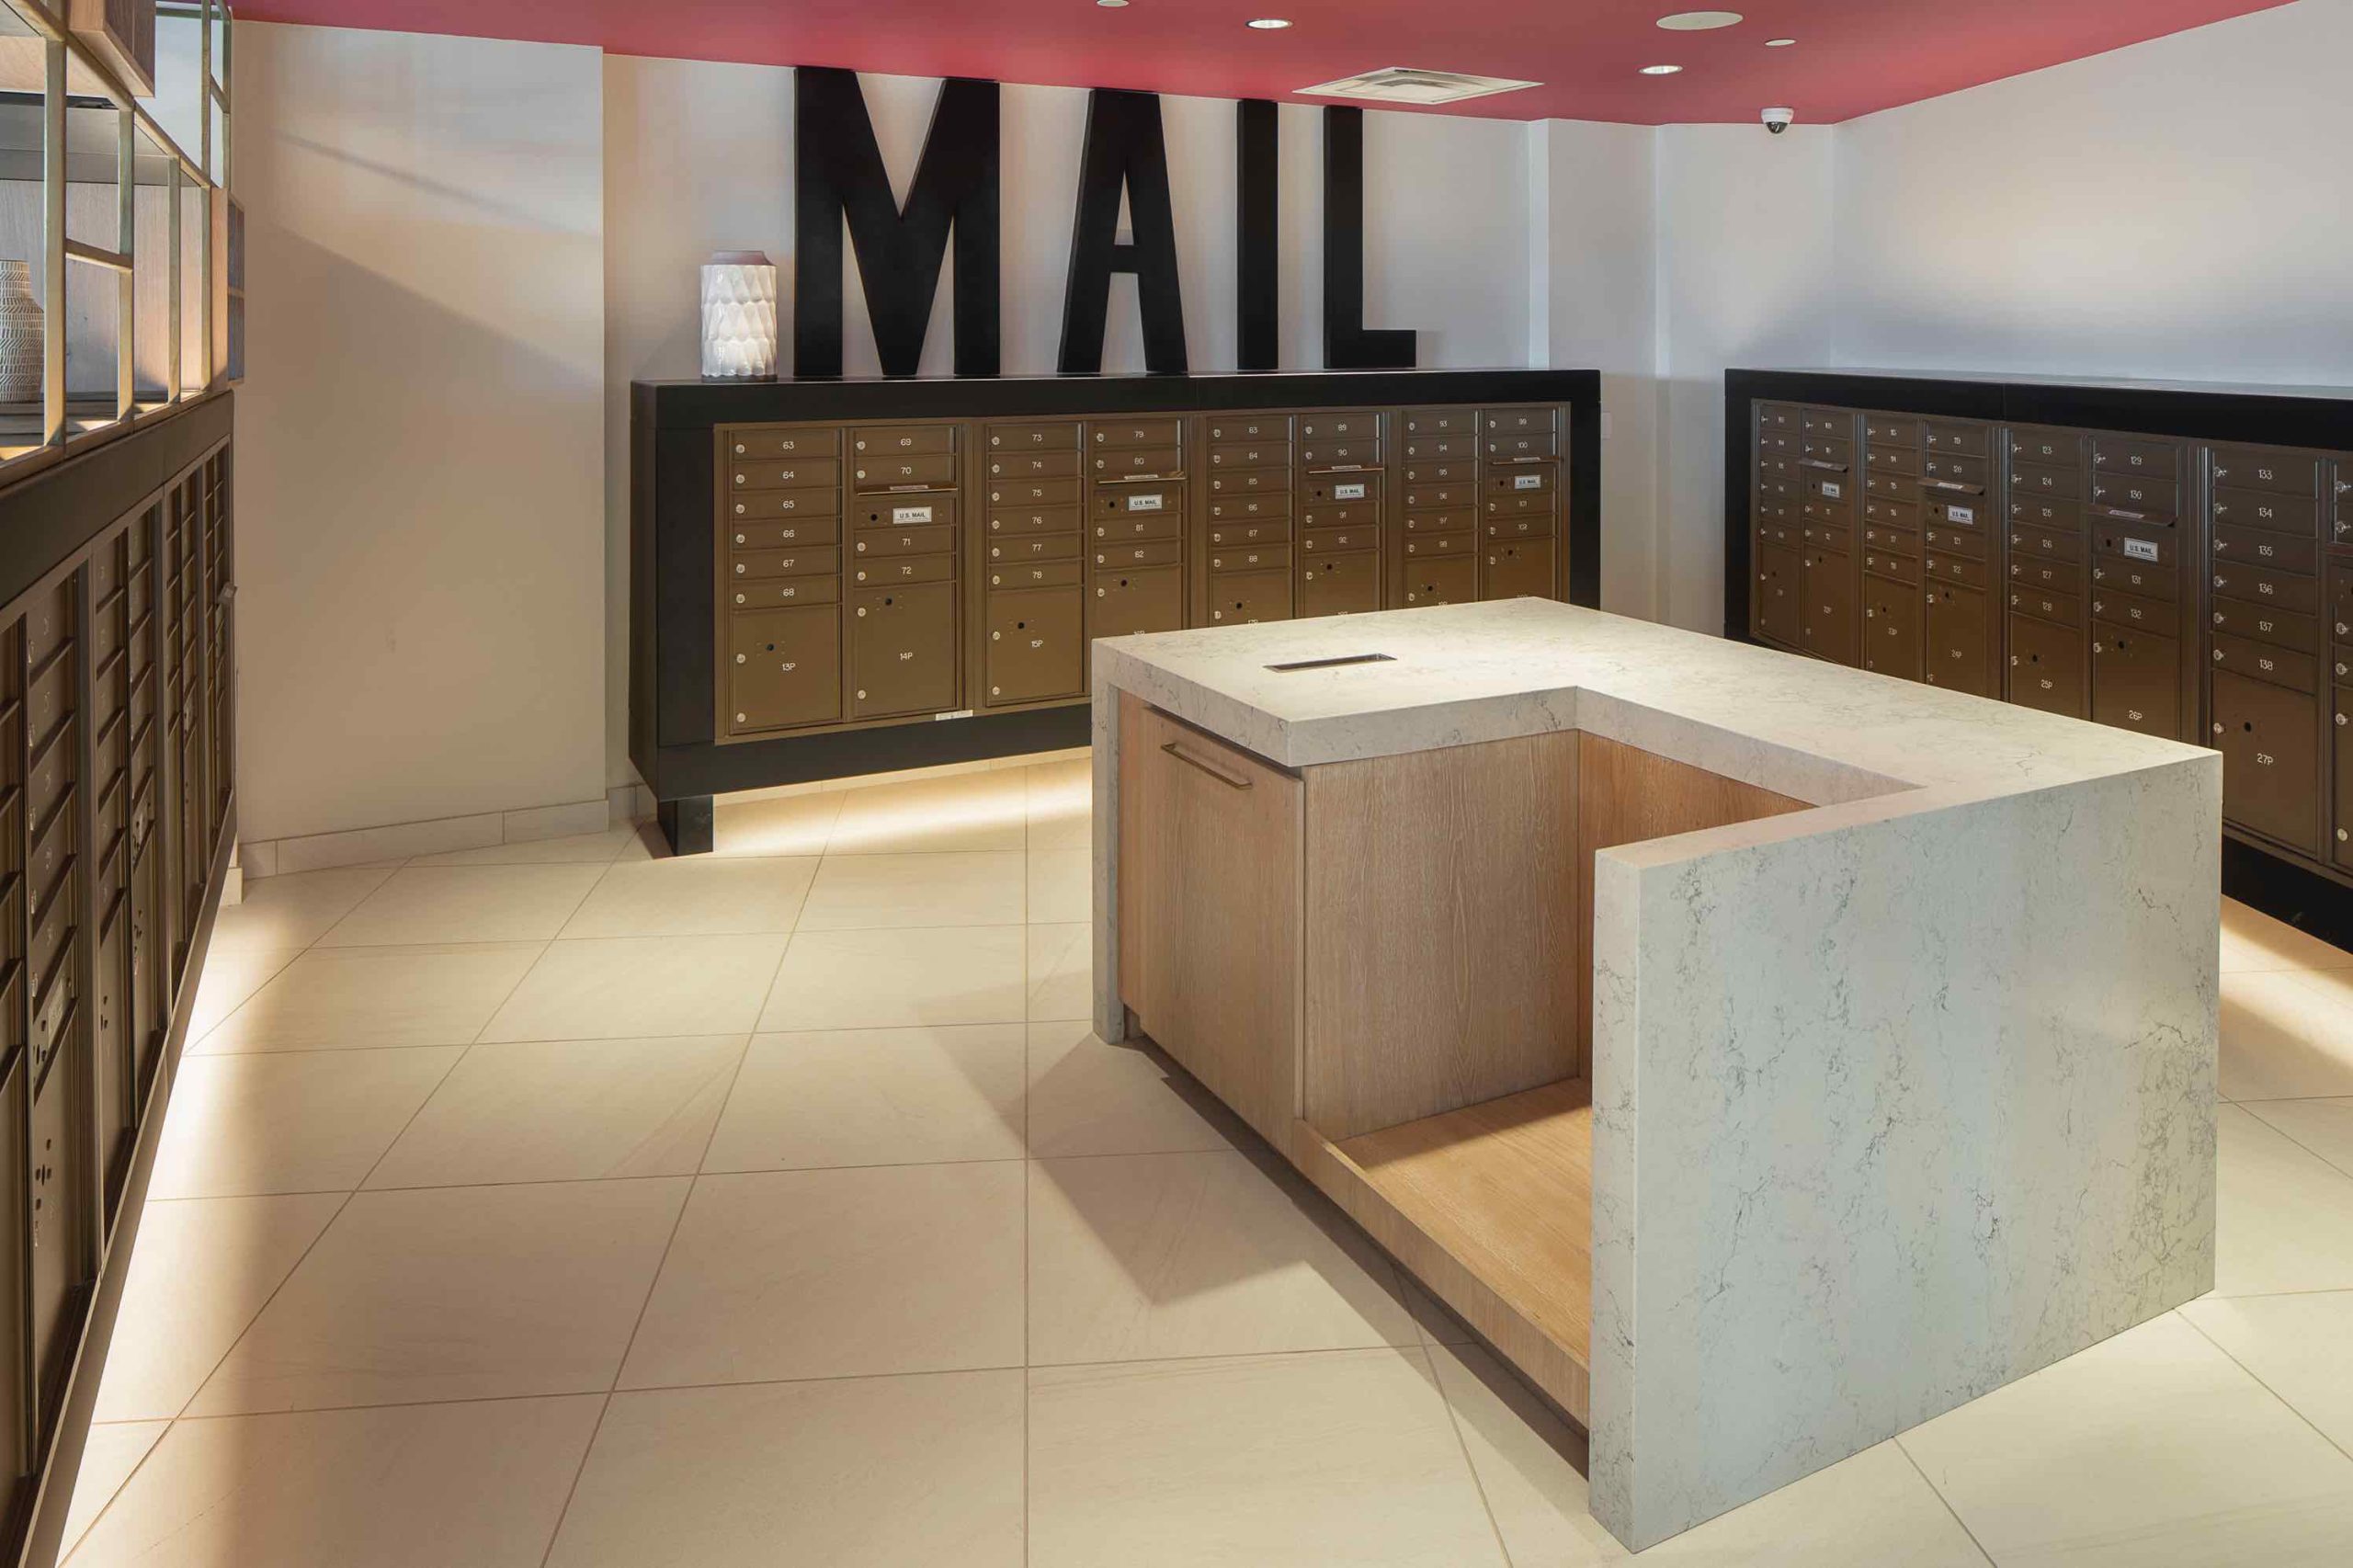 Interior of a mail room with counter. One of the amenities of 250 Mission in Baltimore, MD.